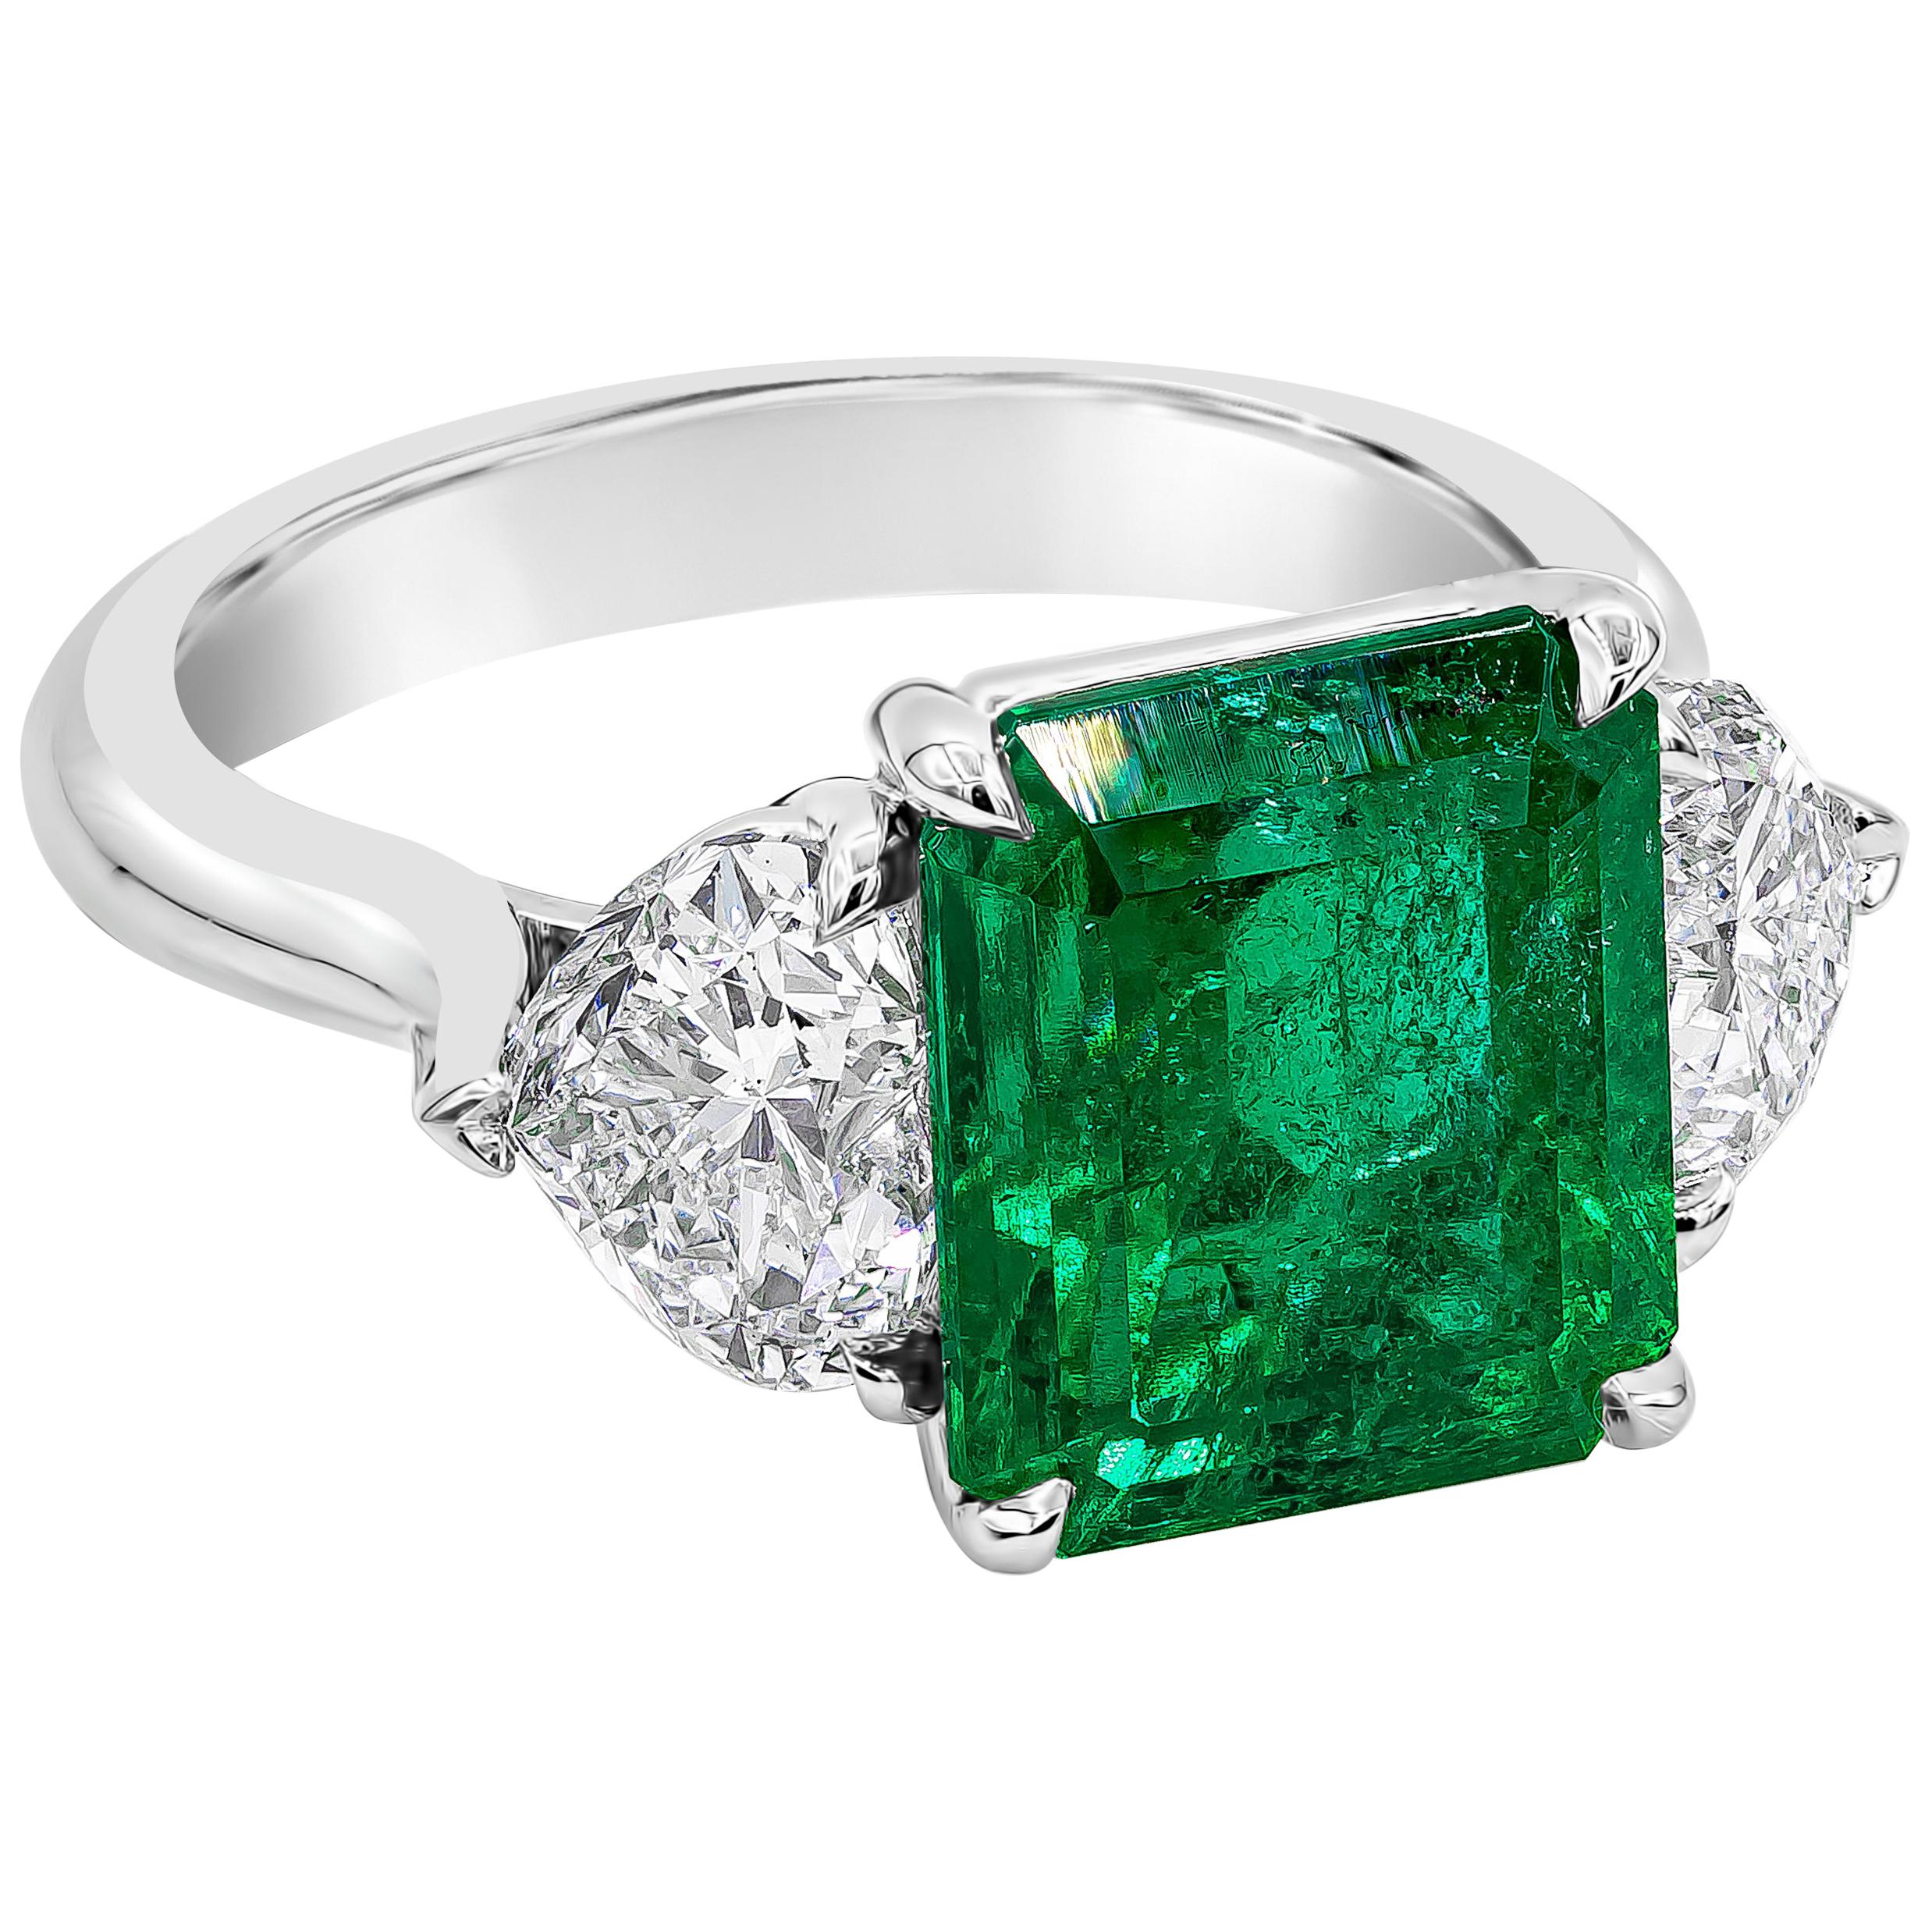 GIA Certified 4.46 Carat Emerald Cut Colombian Emerald & Diamond Engagement Ring